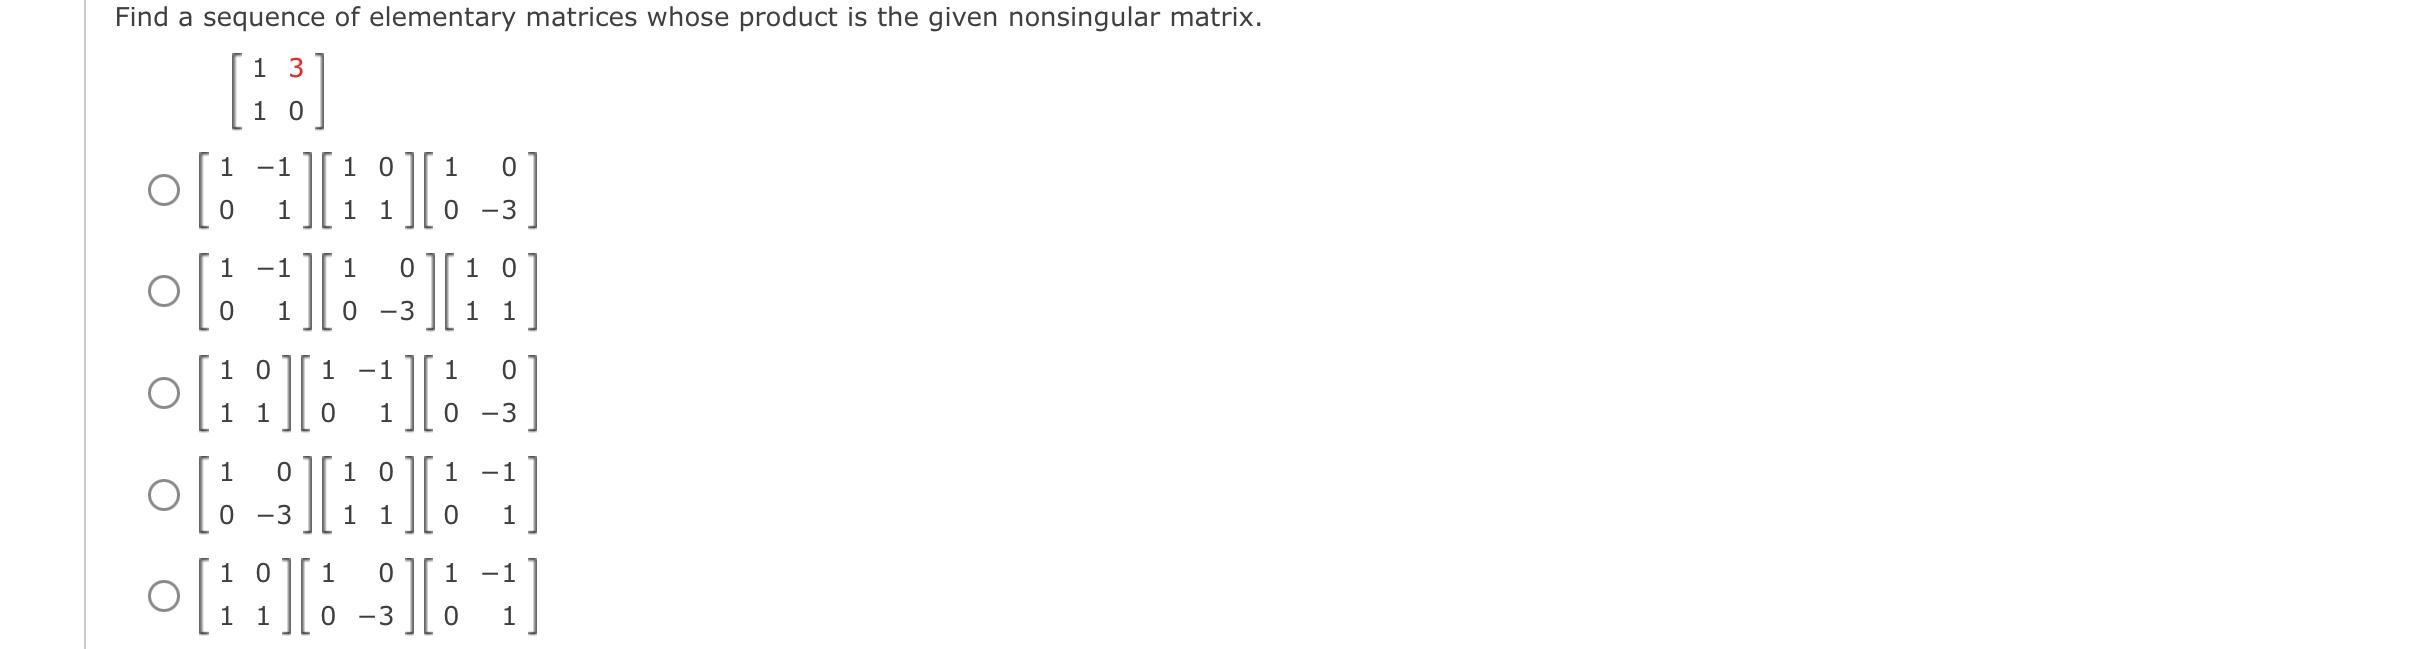 Find a sequence of elementary matrices whose product is the given nonsingular matrix. [13] 1 10 ob 19 0 -1 -1